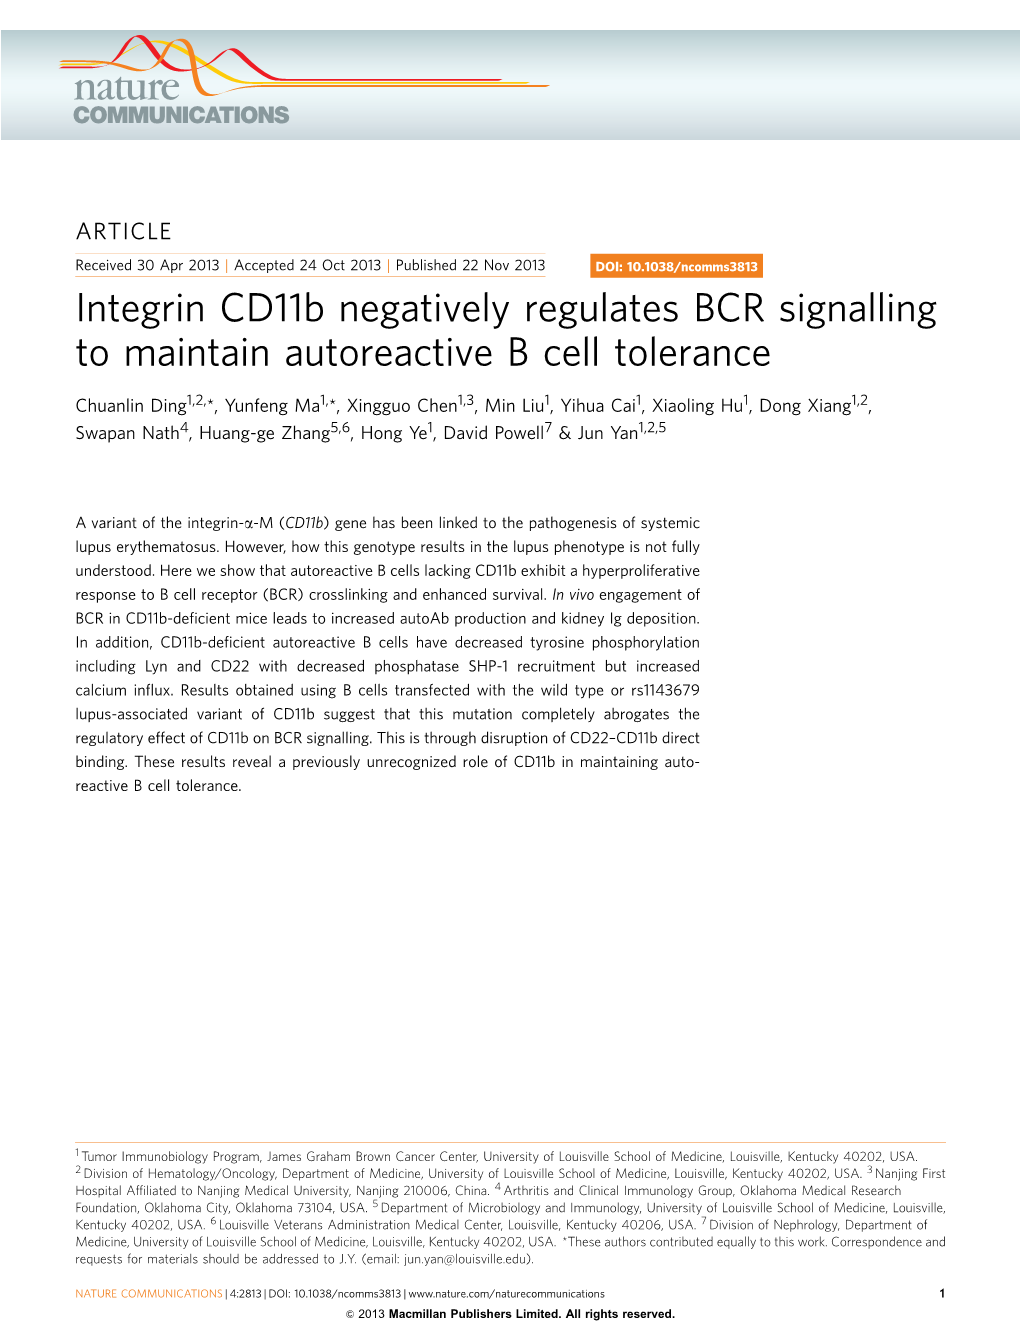 Integrin Cd11b Negatively Regulates BCR Signalling to Maintain Autoreactive B Cell Tolerance